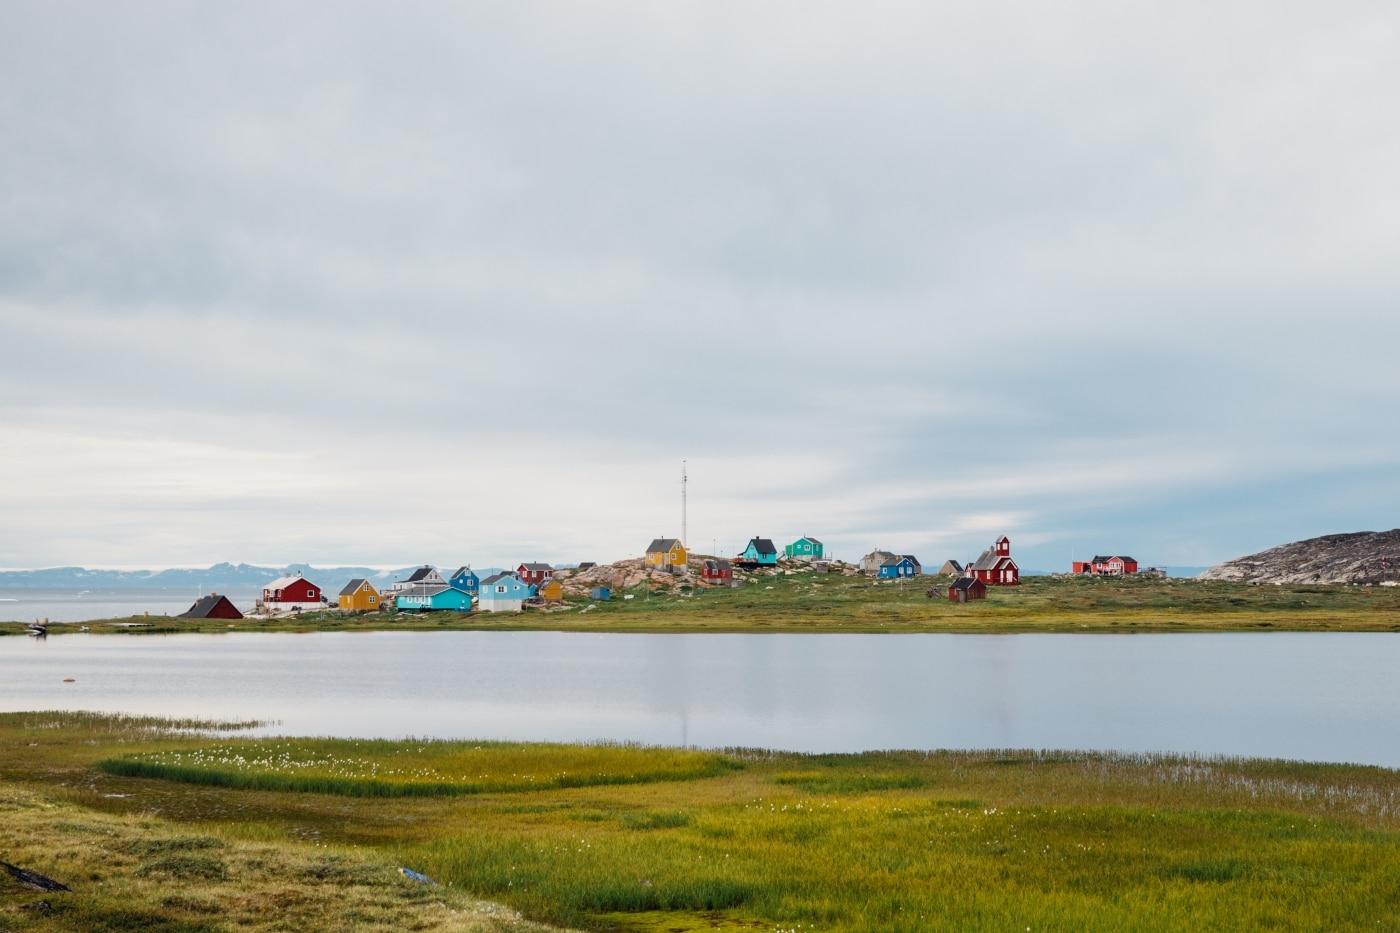 Colourful homes and church in the settlement of Ilimanaq from across the lake 2. Photo by Jessie Brinkman Evans